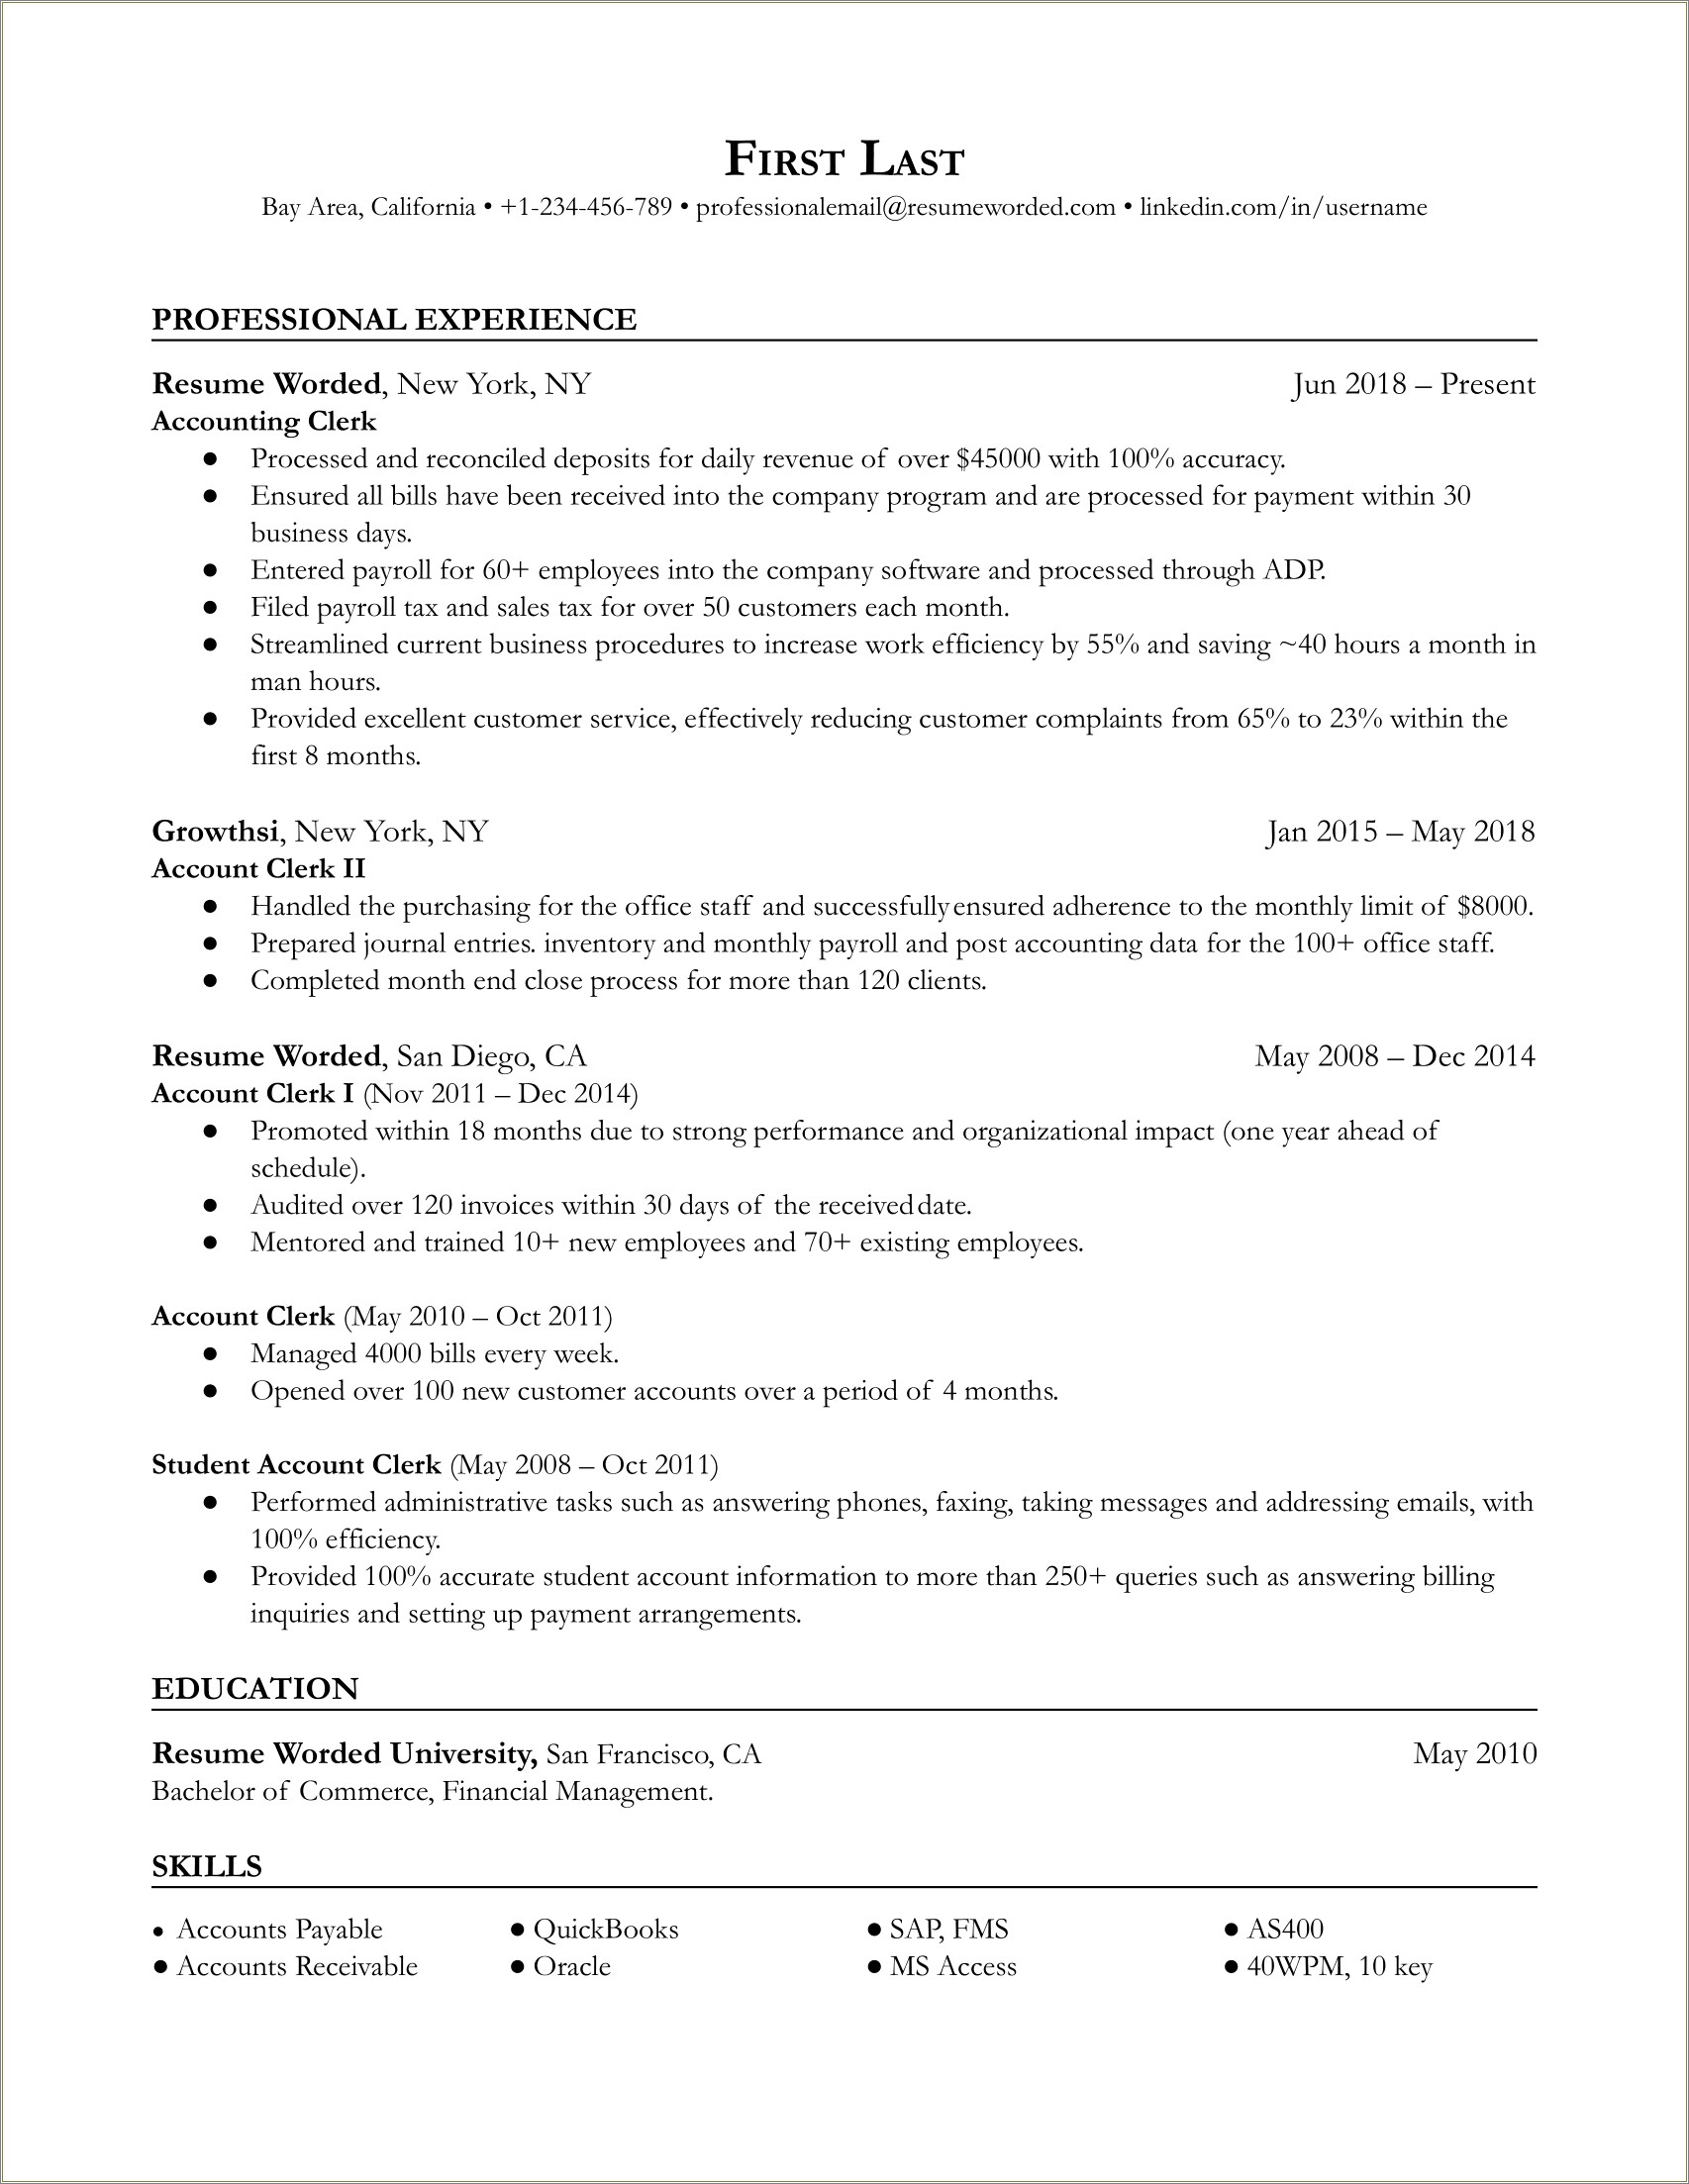 Sample Resume For Accountant In Singapore